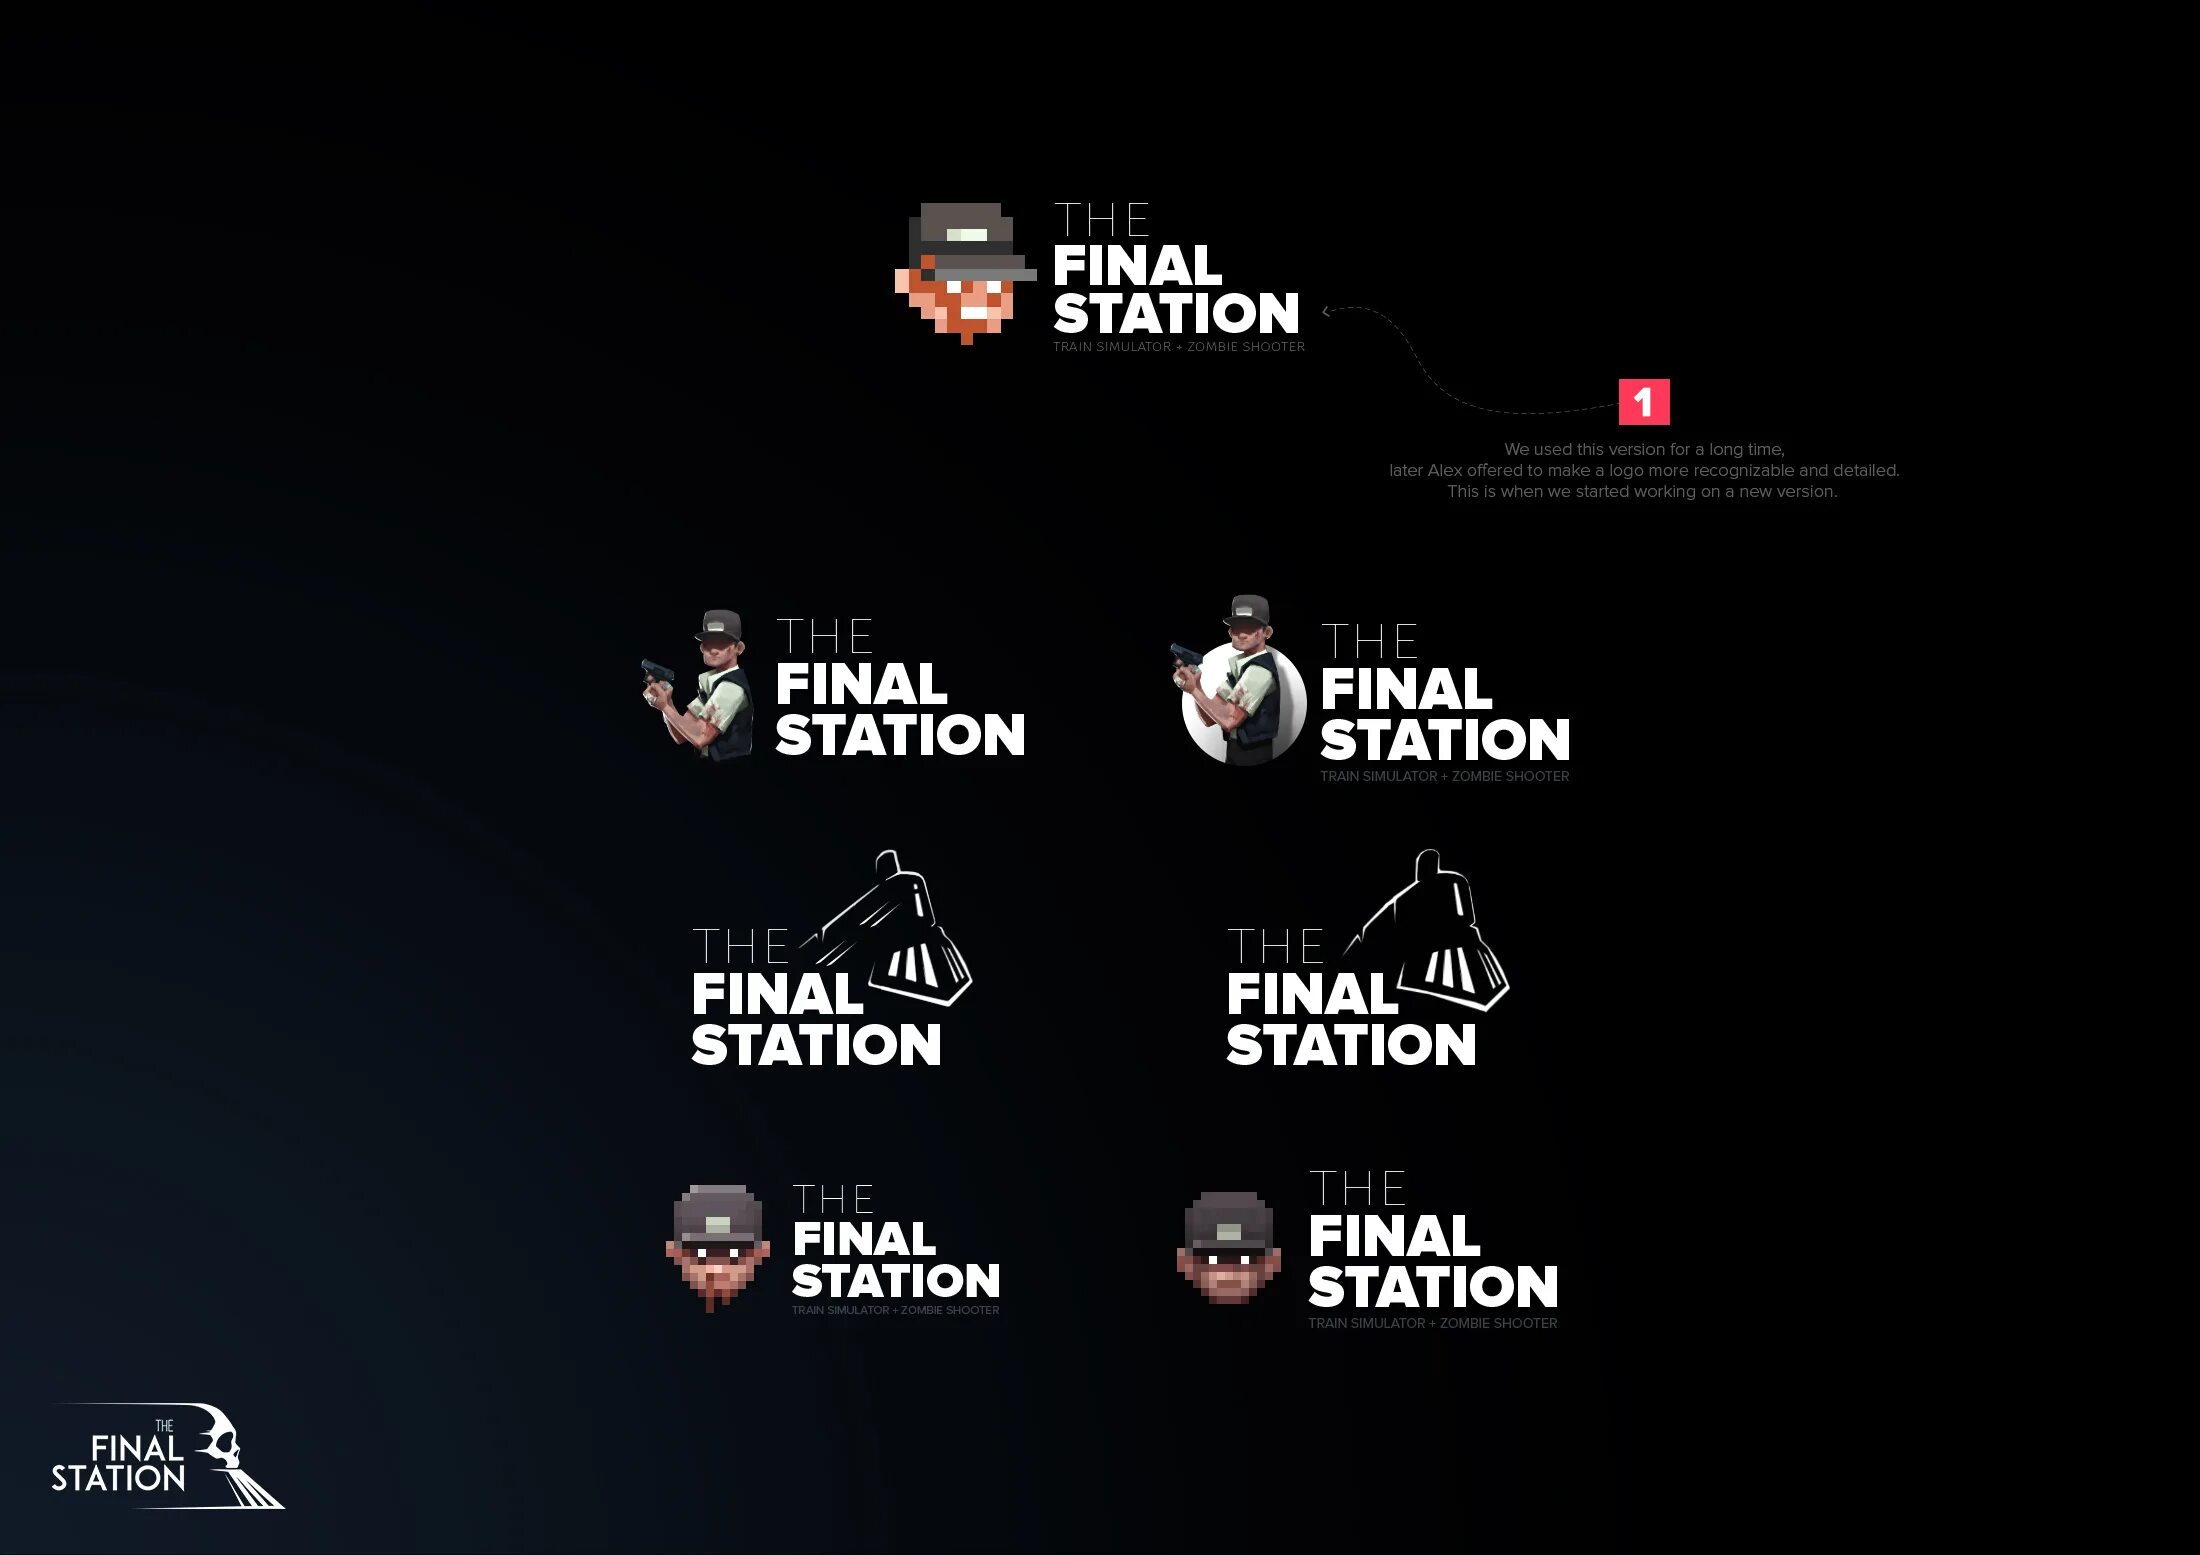 The Final Station. The Final Station артбук. The Final Station Страж. Final Station игра. The finals на андроид